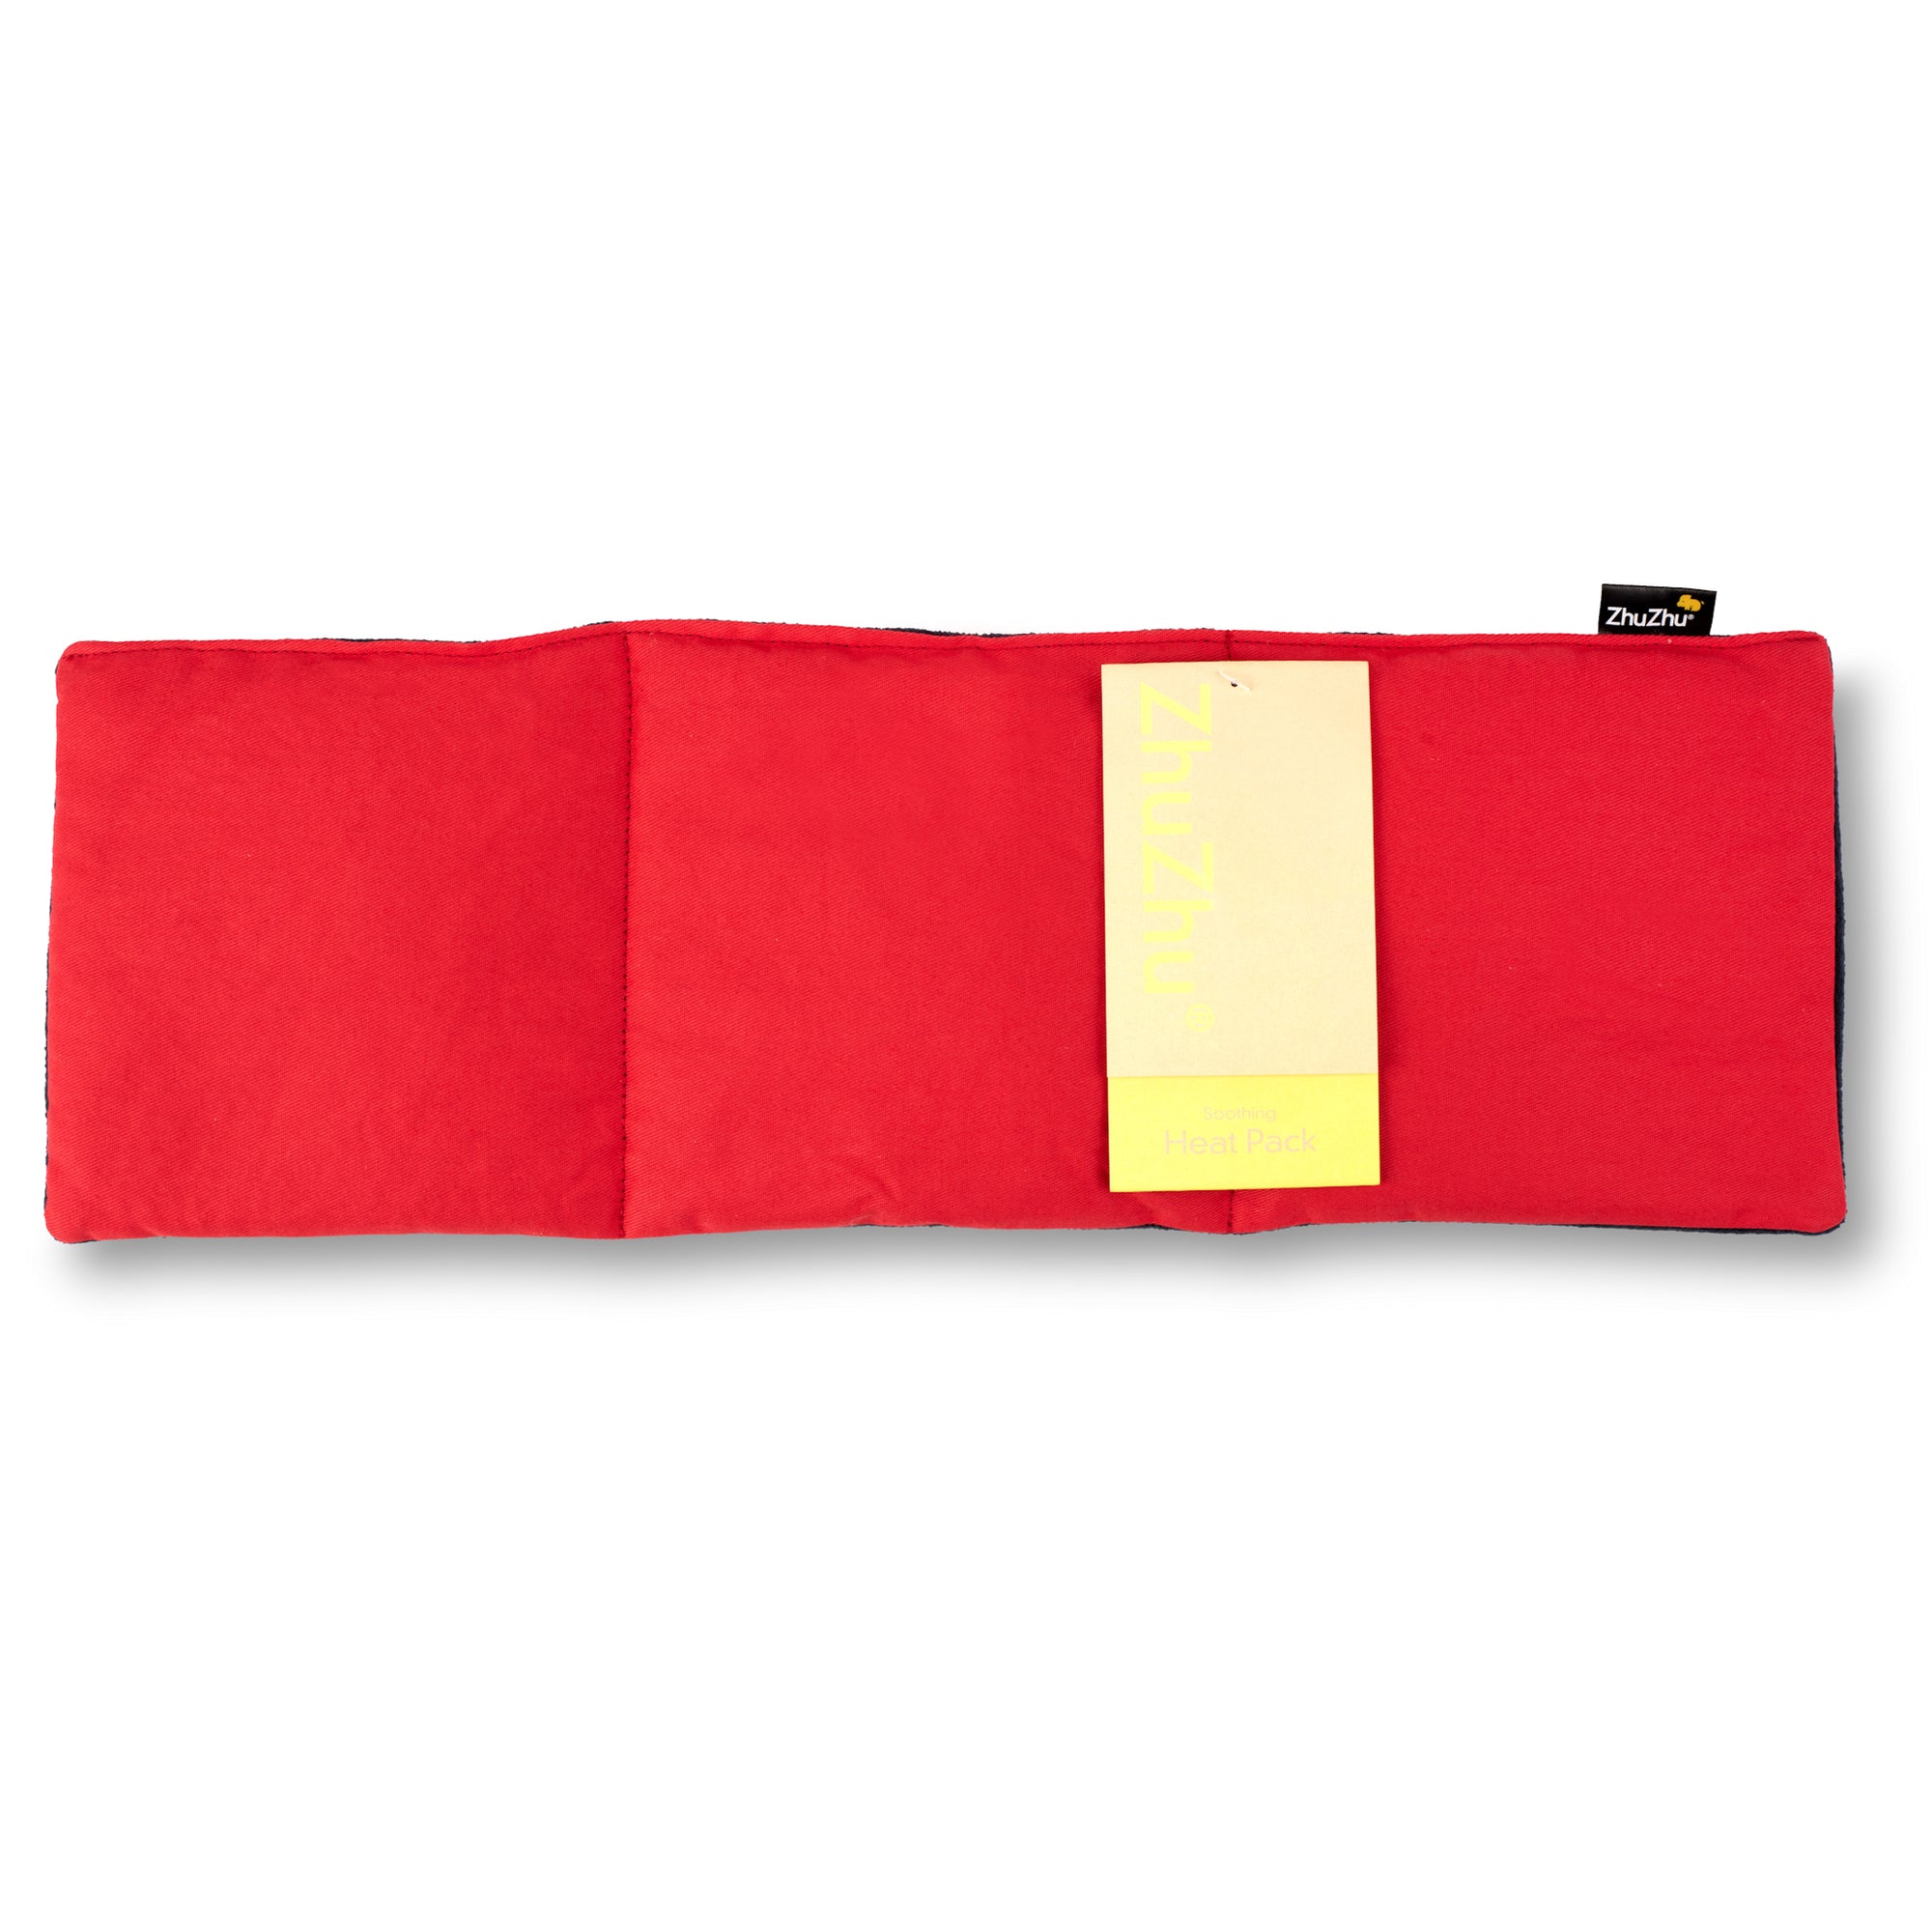 Zhu-Zhu Soothing Heat Pack - Navy Fleece & Red Twill Unscented Microwave Wheat Bag